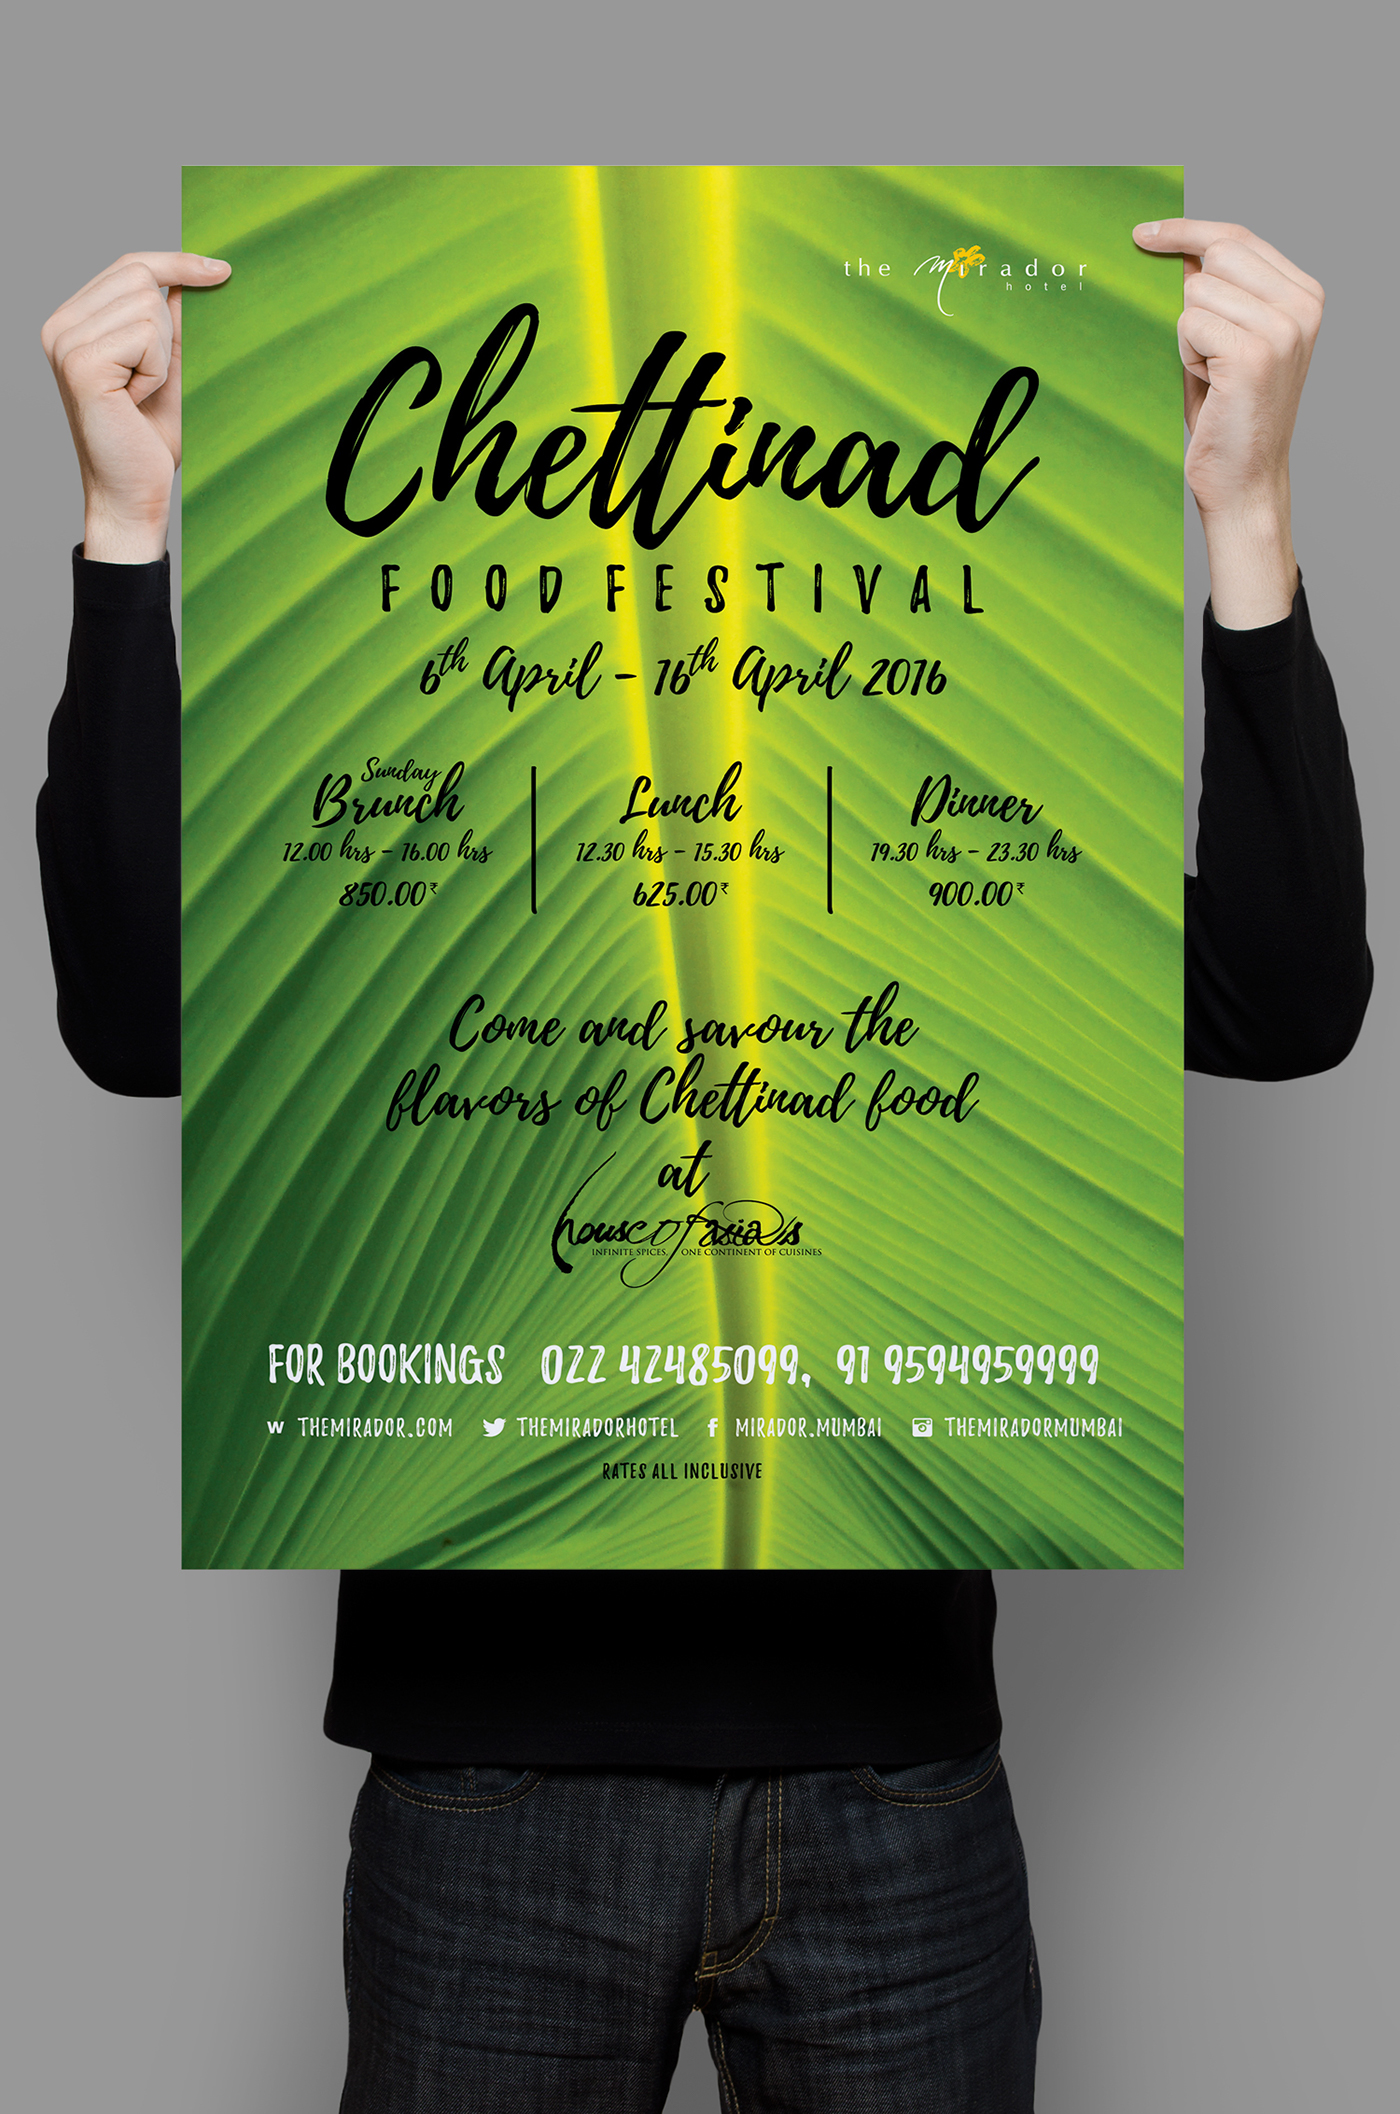 poster foodfestival food fest hotel themiradorhotel marketing   Collateral flier coreldraw flyer Food  banana leaf South Indian Coconut